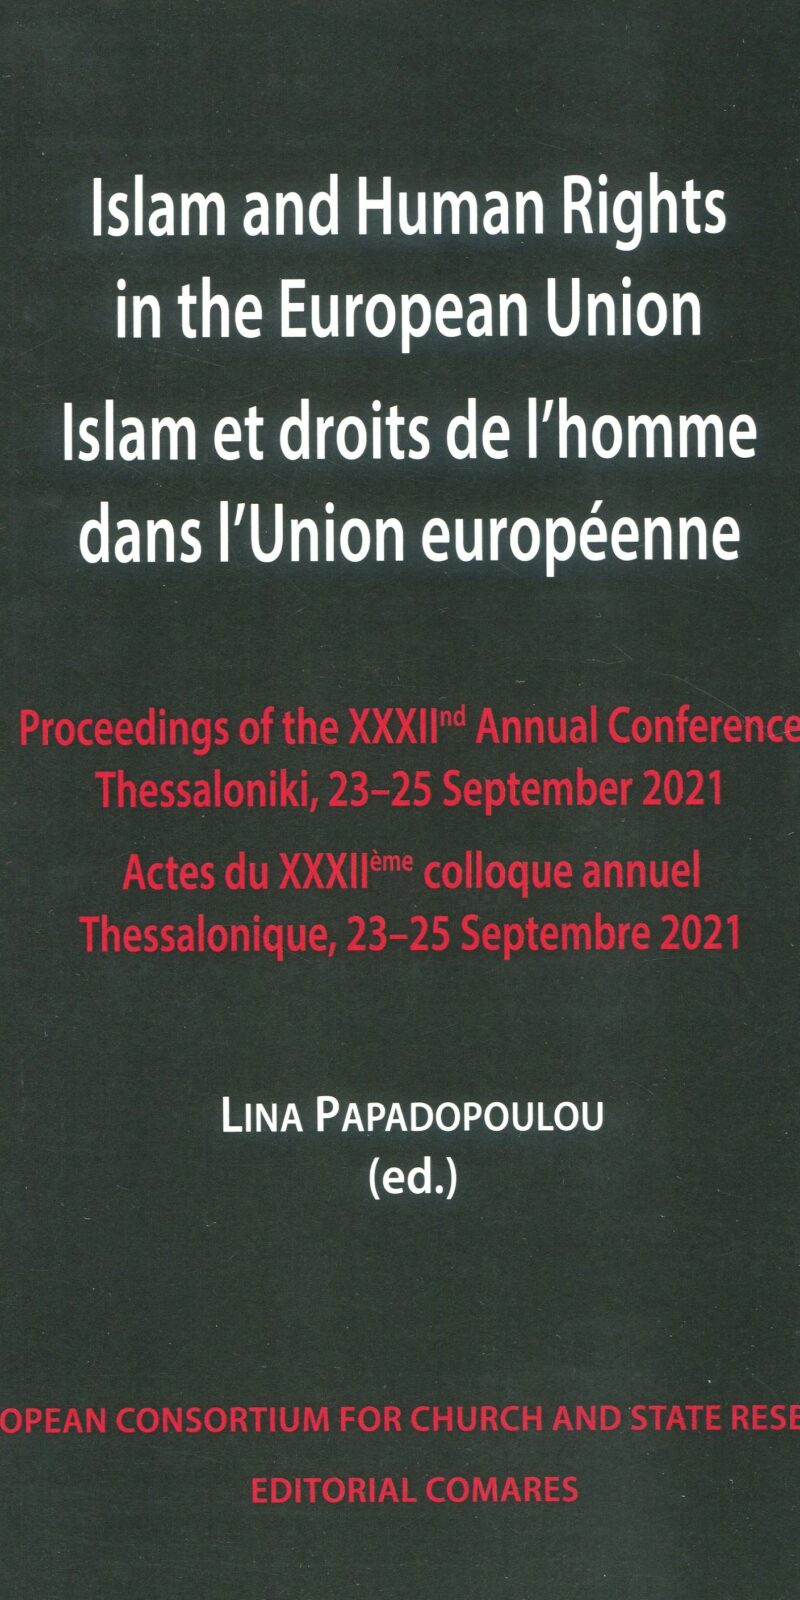 Islam and human rights in European Union 9788413694658